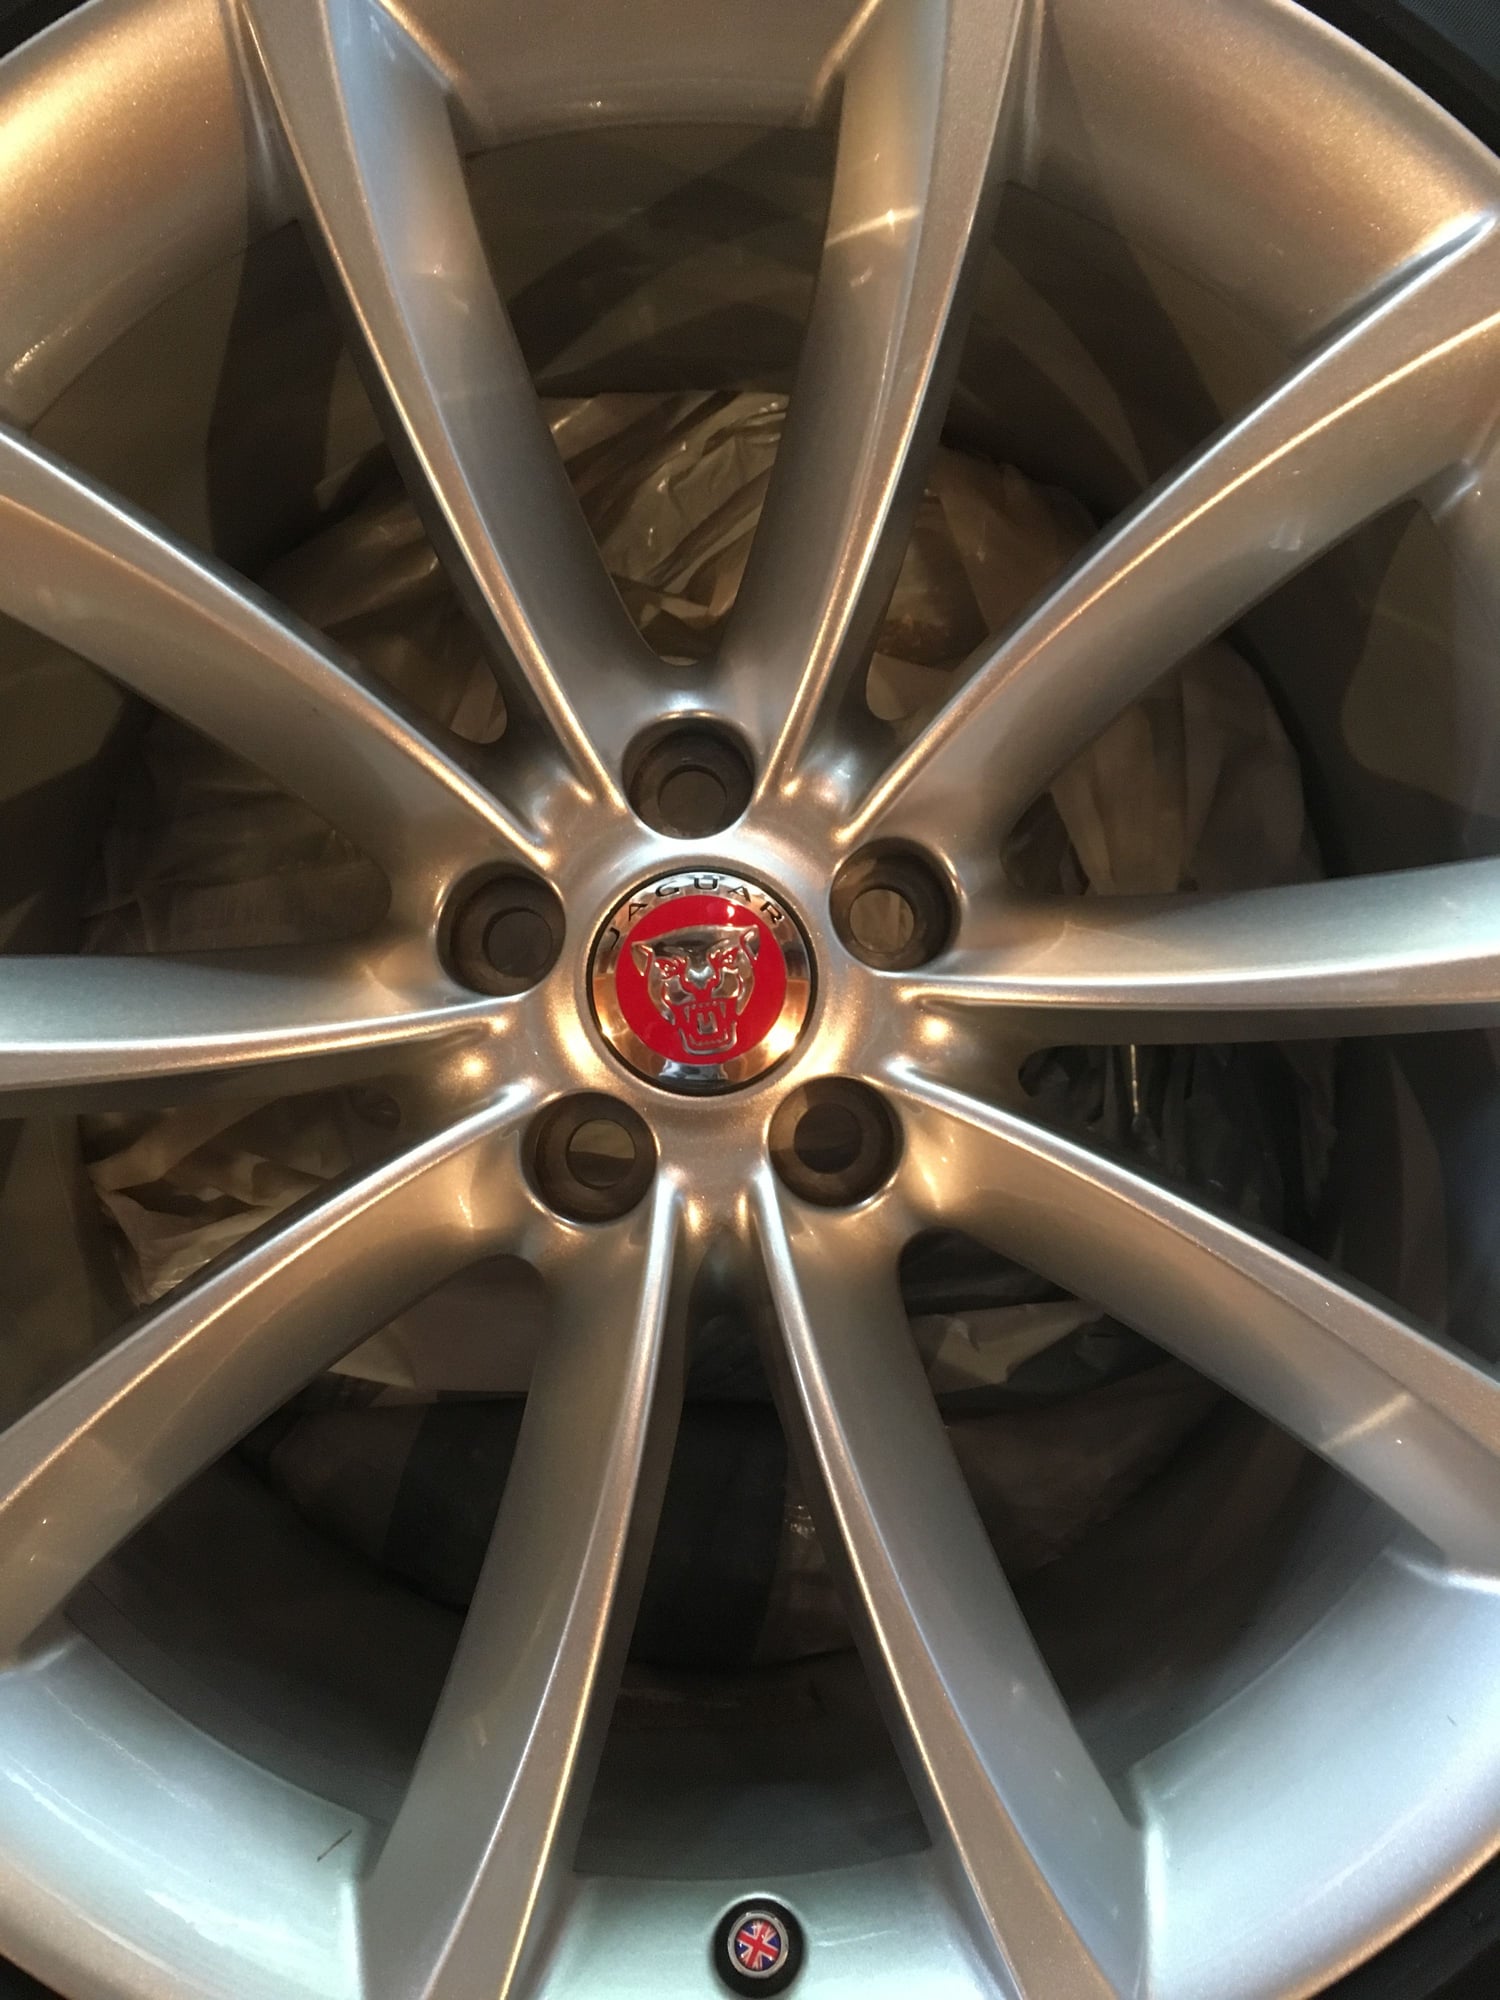 Wheels and Tires/Axles - 4 OEM Propeller Wheels For Sale - Used - 2015 Jaguar F-Type - Brunswick, ME 04011, United States